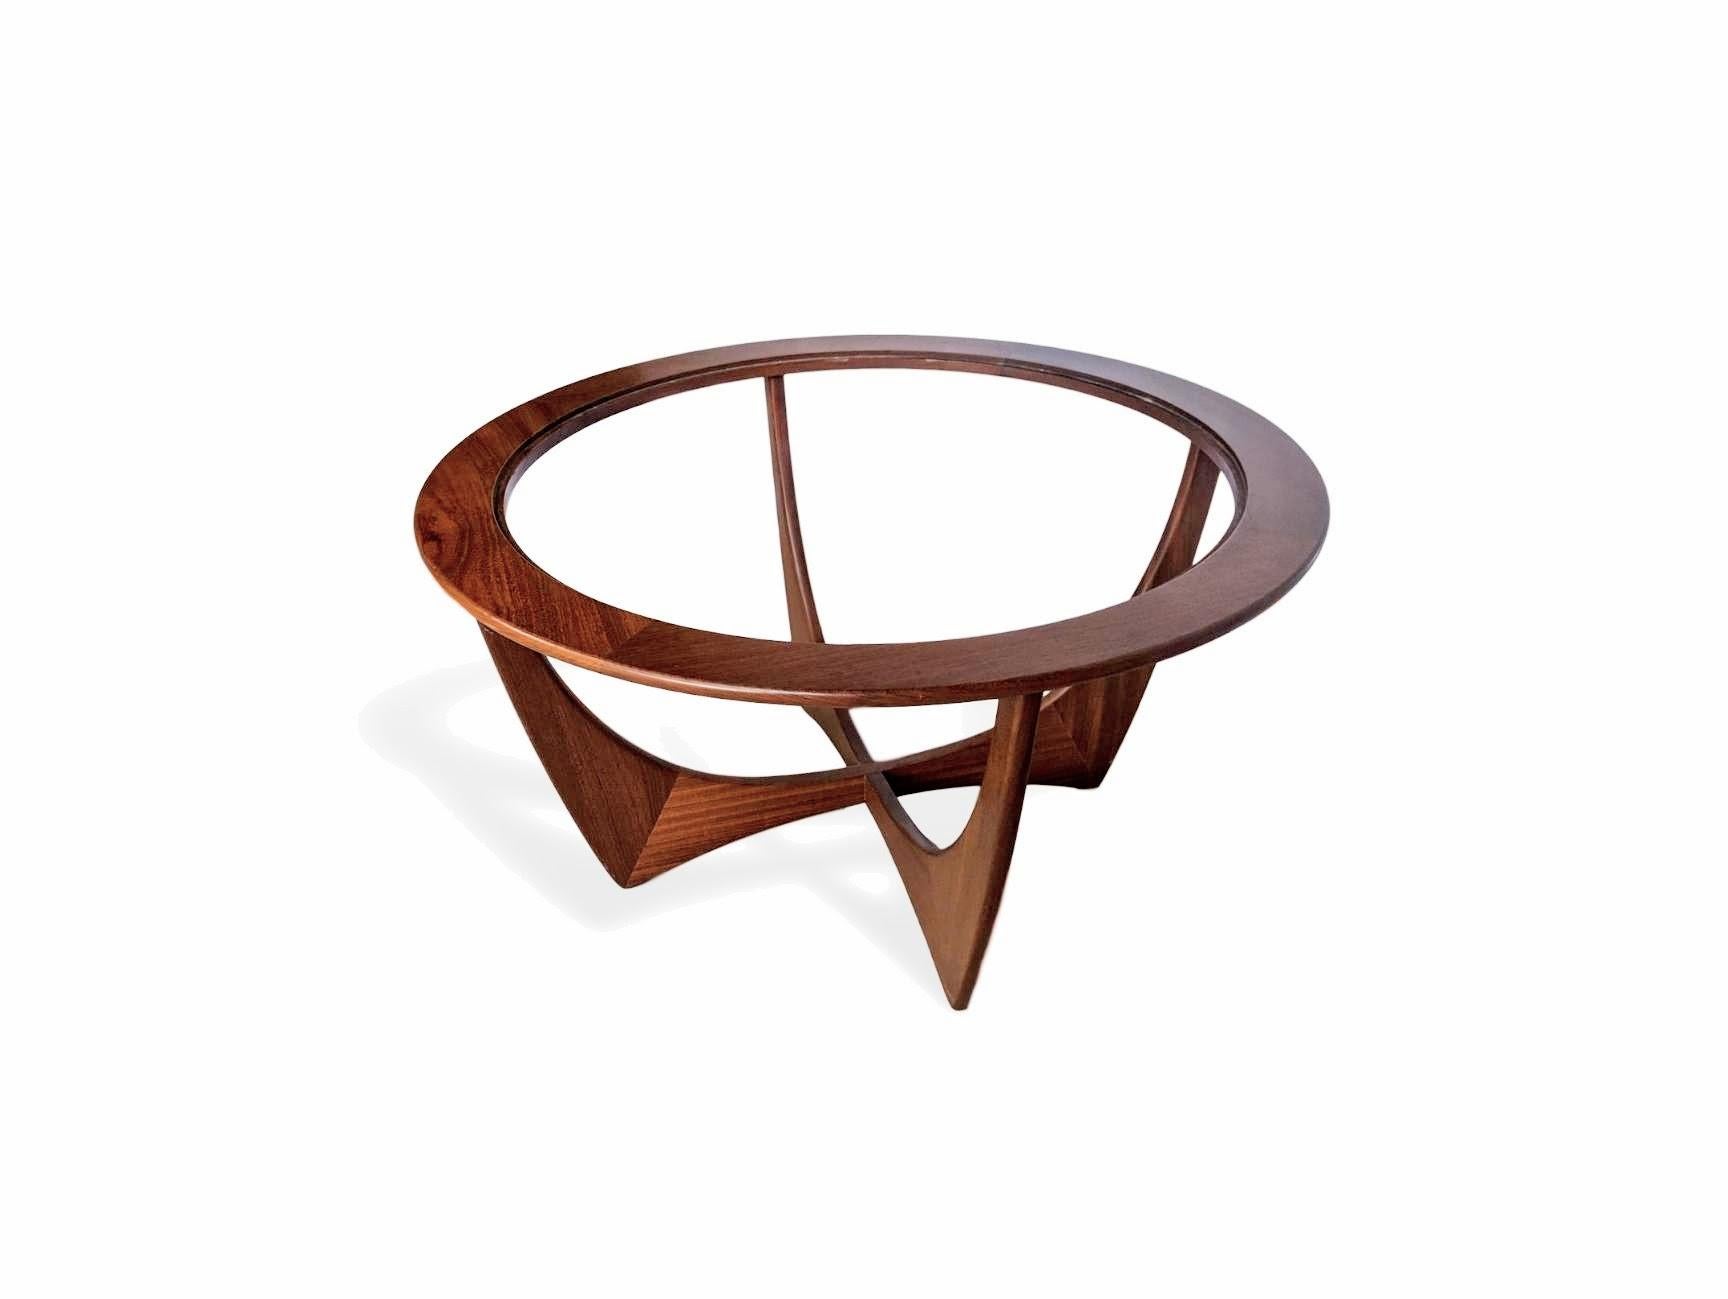 Mid-Century Modern “Astro” coffee table by G-Plan, English, circa 1960. This iconic table, designed by Victor Wilkins for G-Plan in 1960, is an emblem of the time, the world’s entry into the Space Age. Constructed of Afromasia Teak to the highest